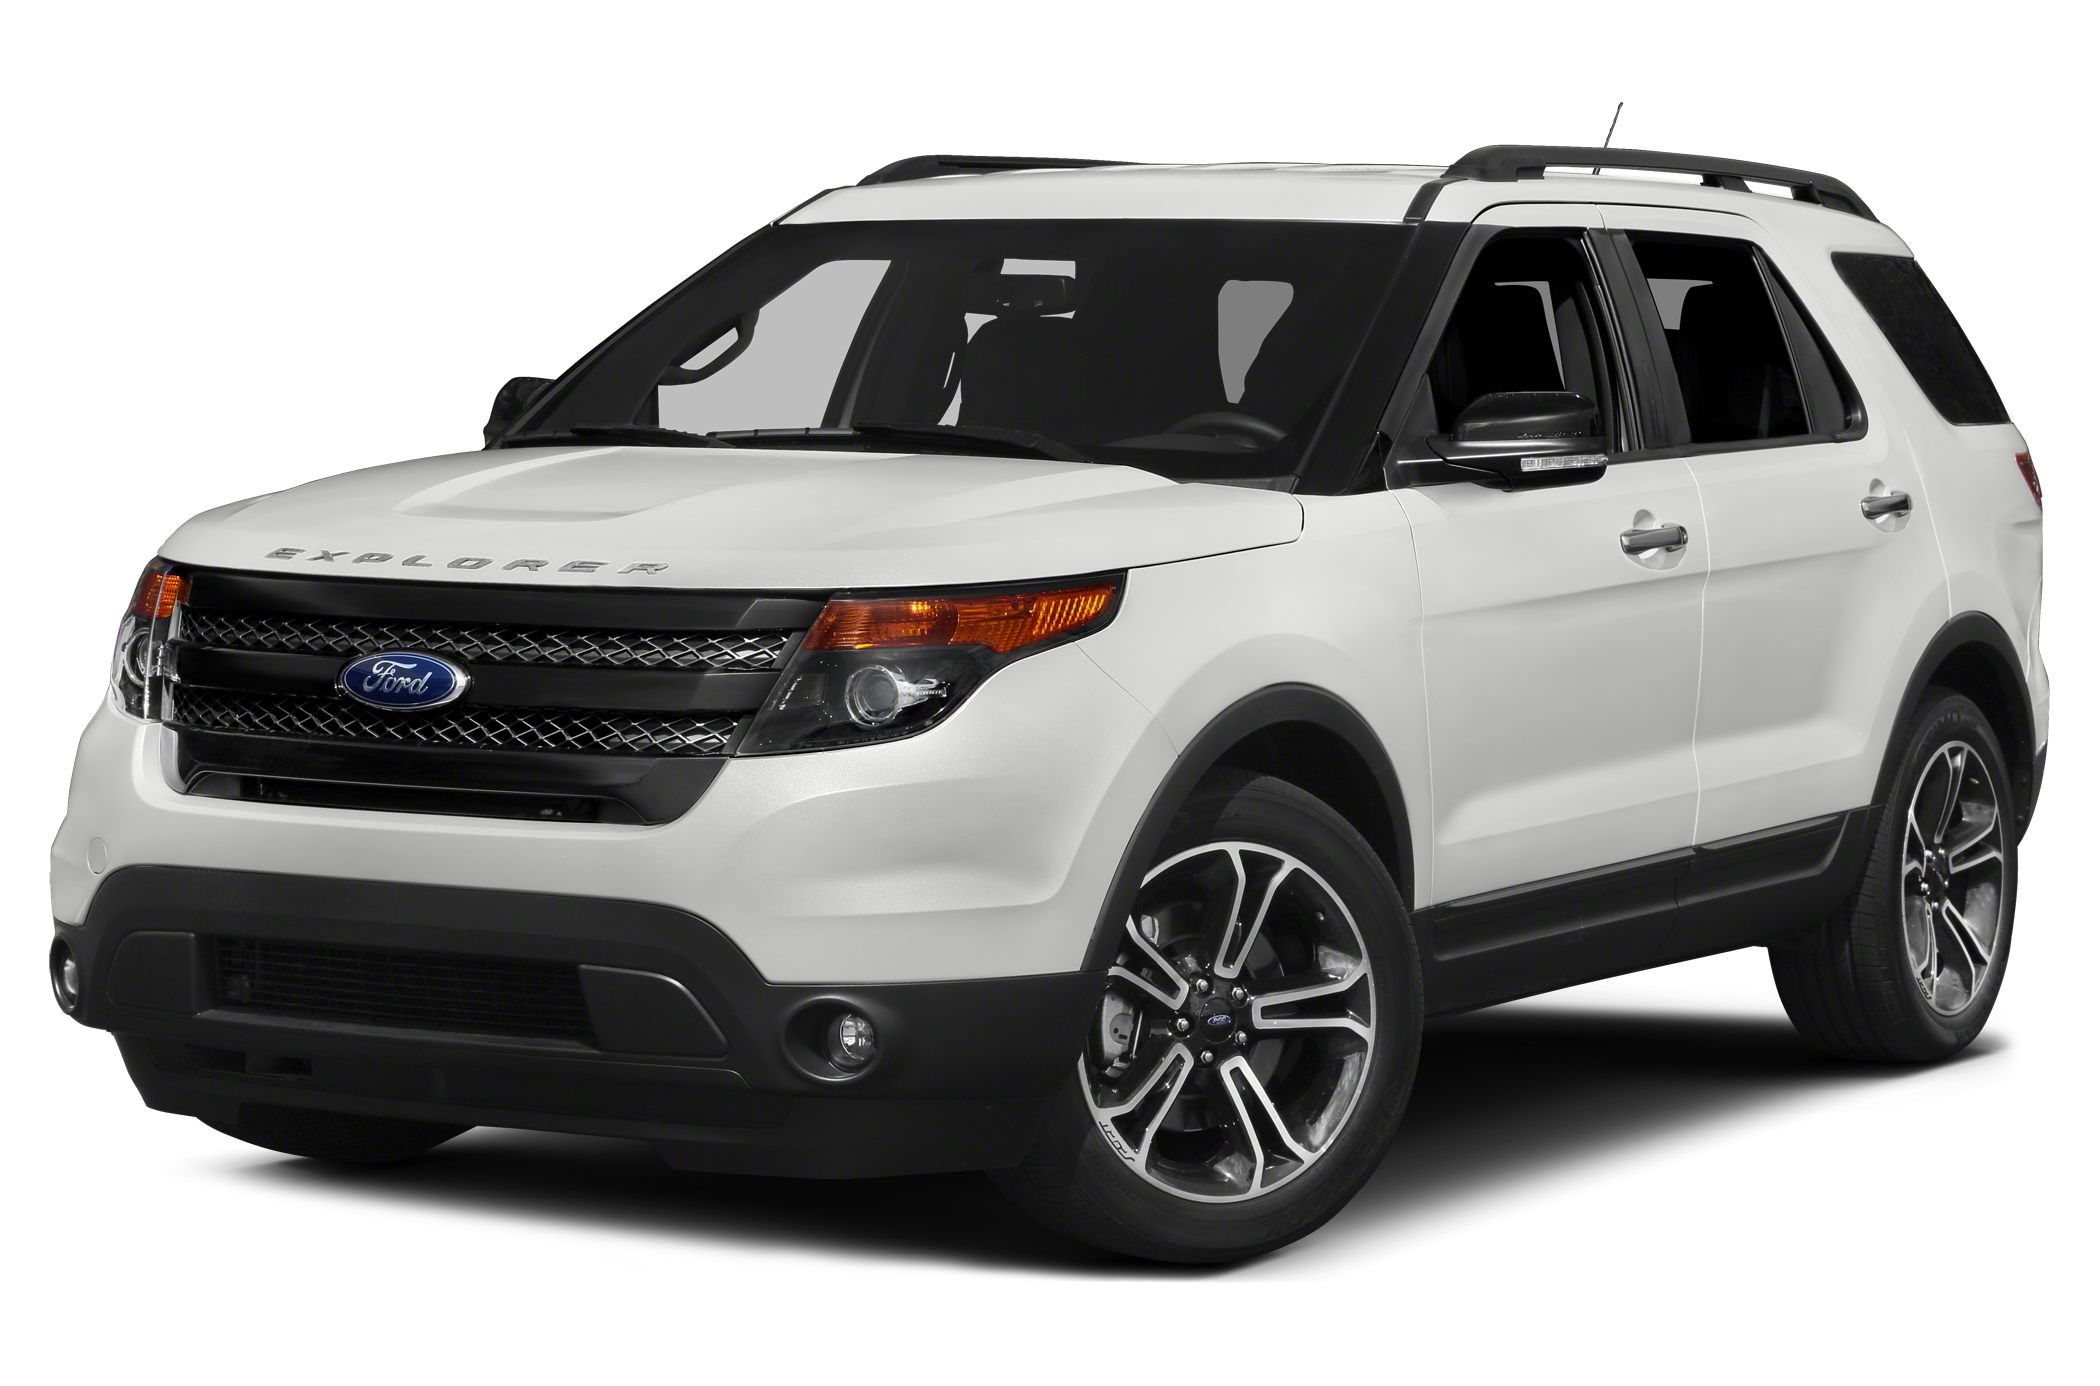 2015 Ford Explorer Sport 4dr 4x4 Pictures